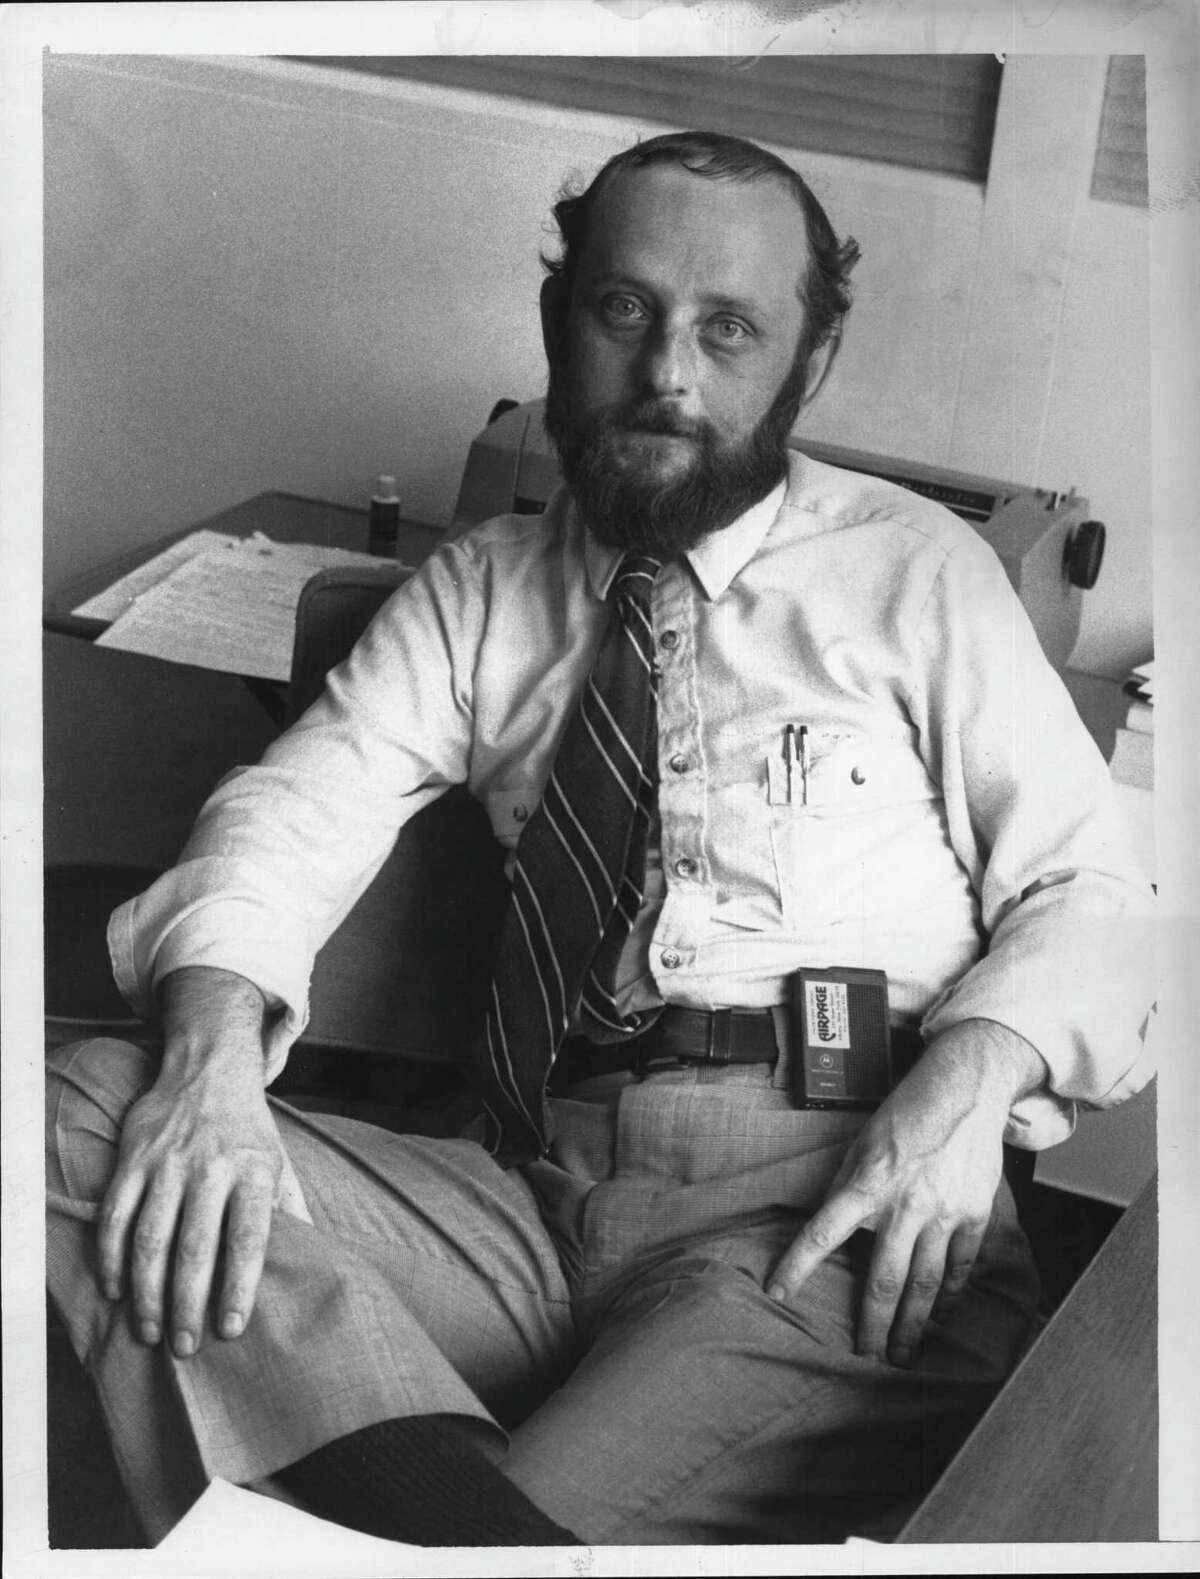 Corrections Dept, Building 2 state campus, James Flateau, public relations director. August 1, 1984 (Paul Kniskern/Times Union Archive)